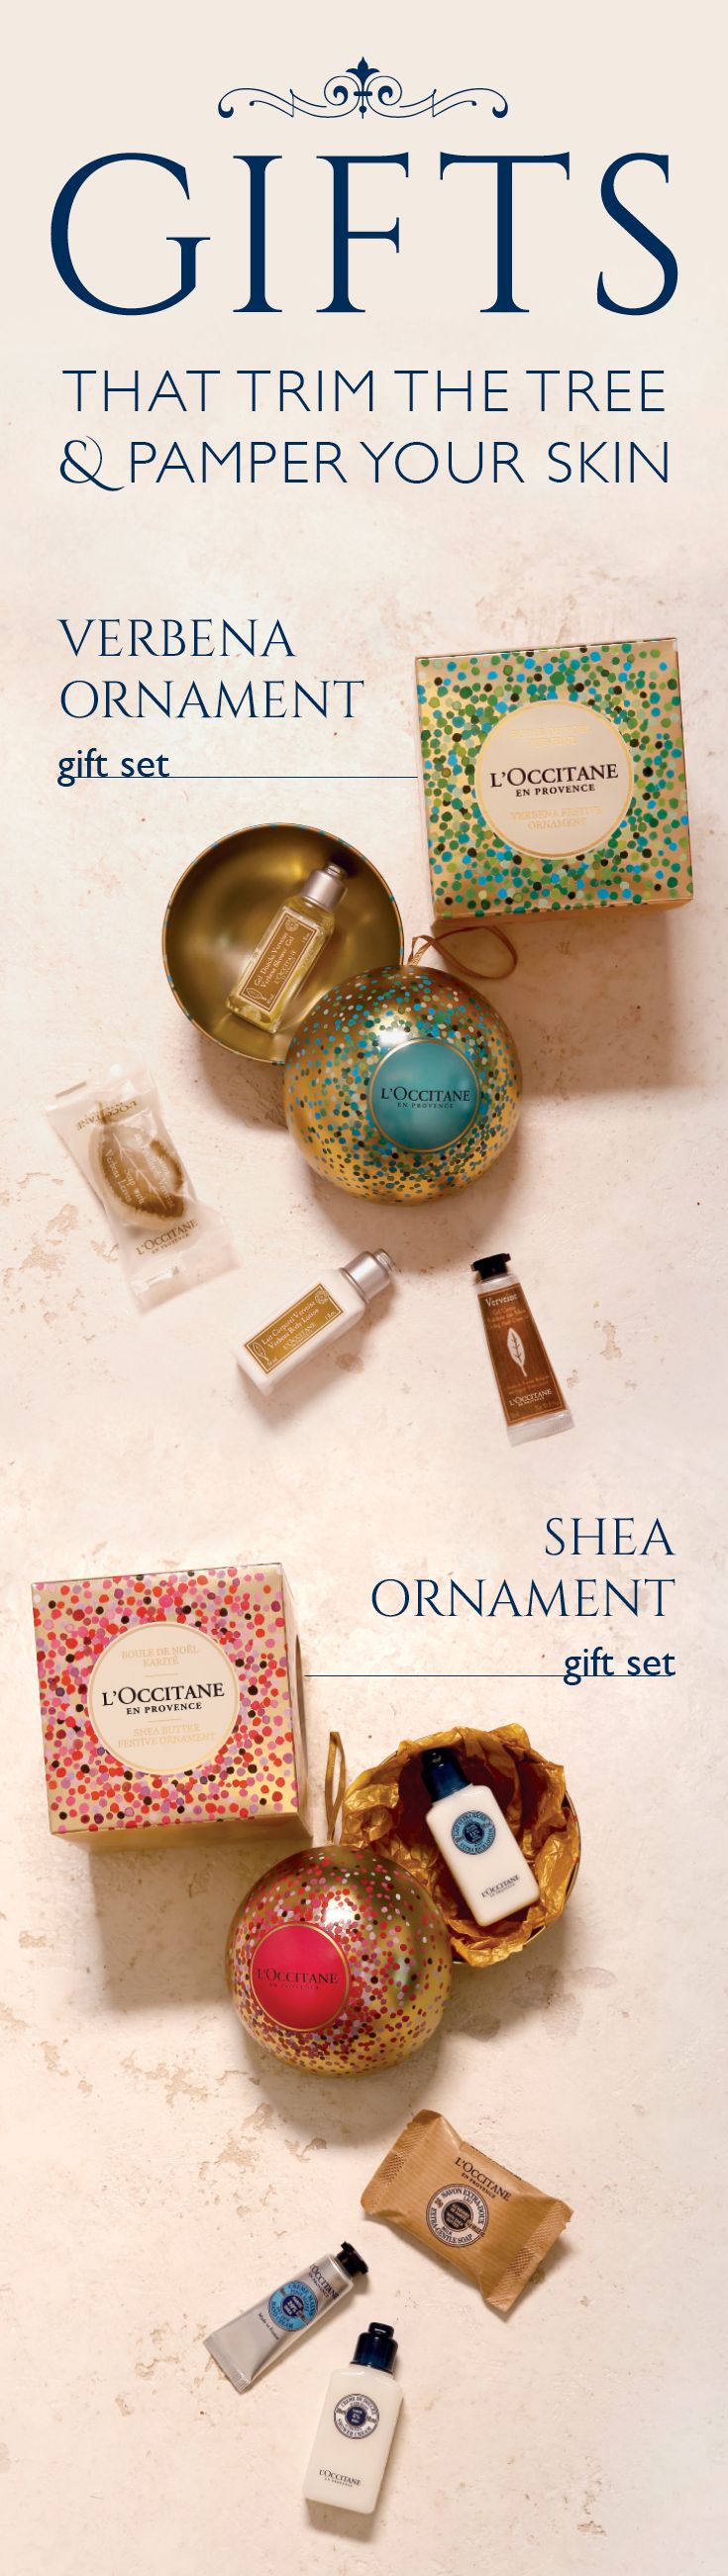 L'Occitane Shea Butter and Verbena Ornaments for Holiday 2015